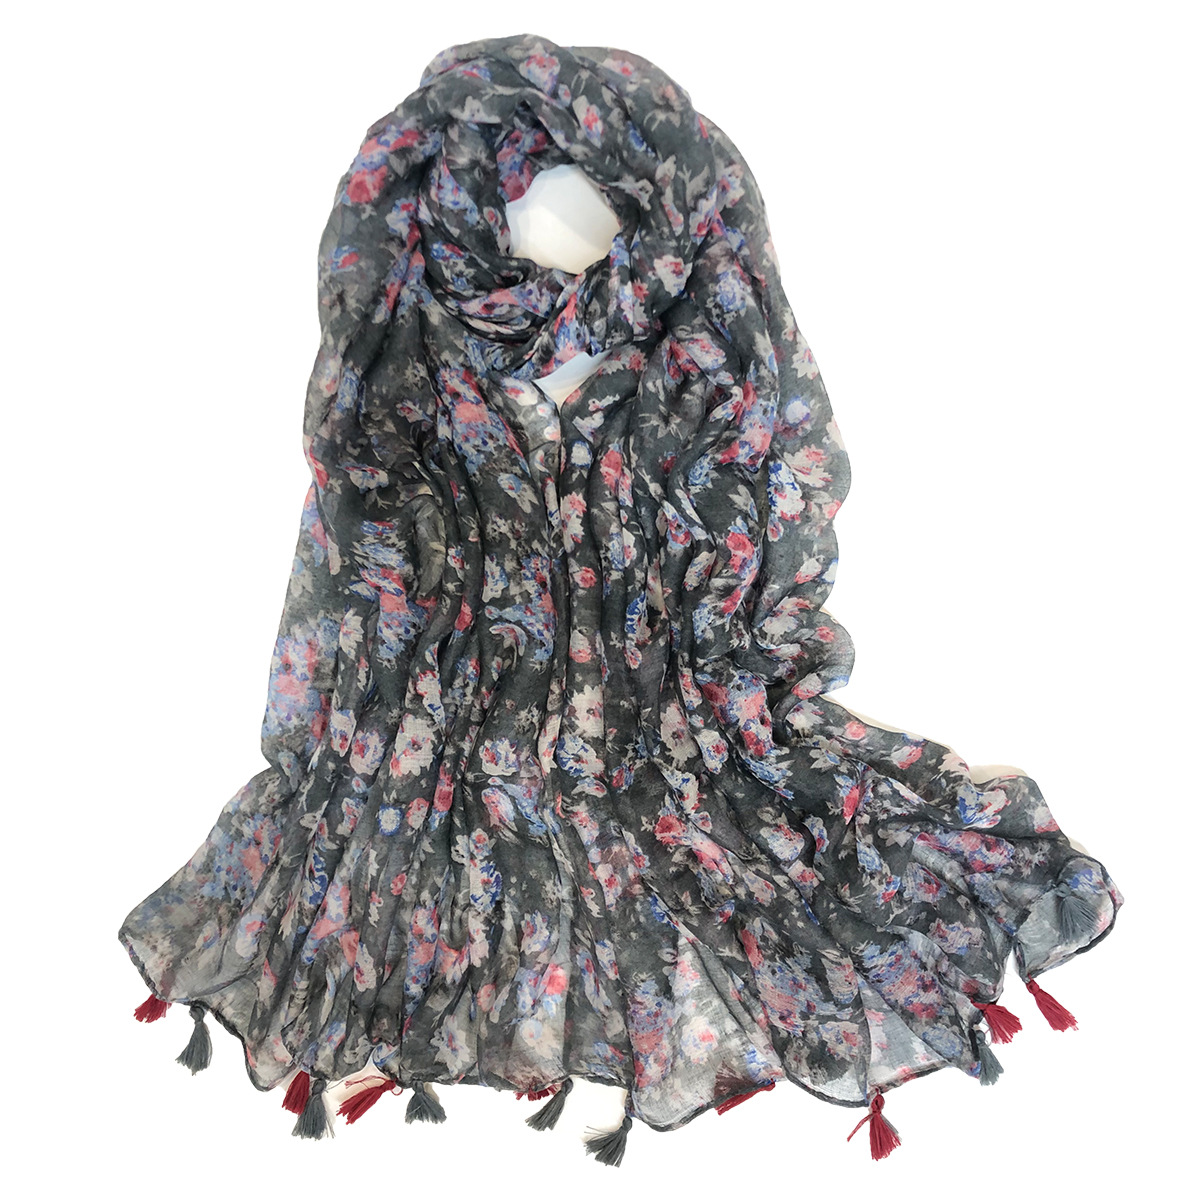 New European and American Spring Summer Fashion All-Matching Printed Tassel Scarf Shawl Exclusive for Cross-Border Factory Wholesale